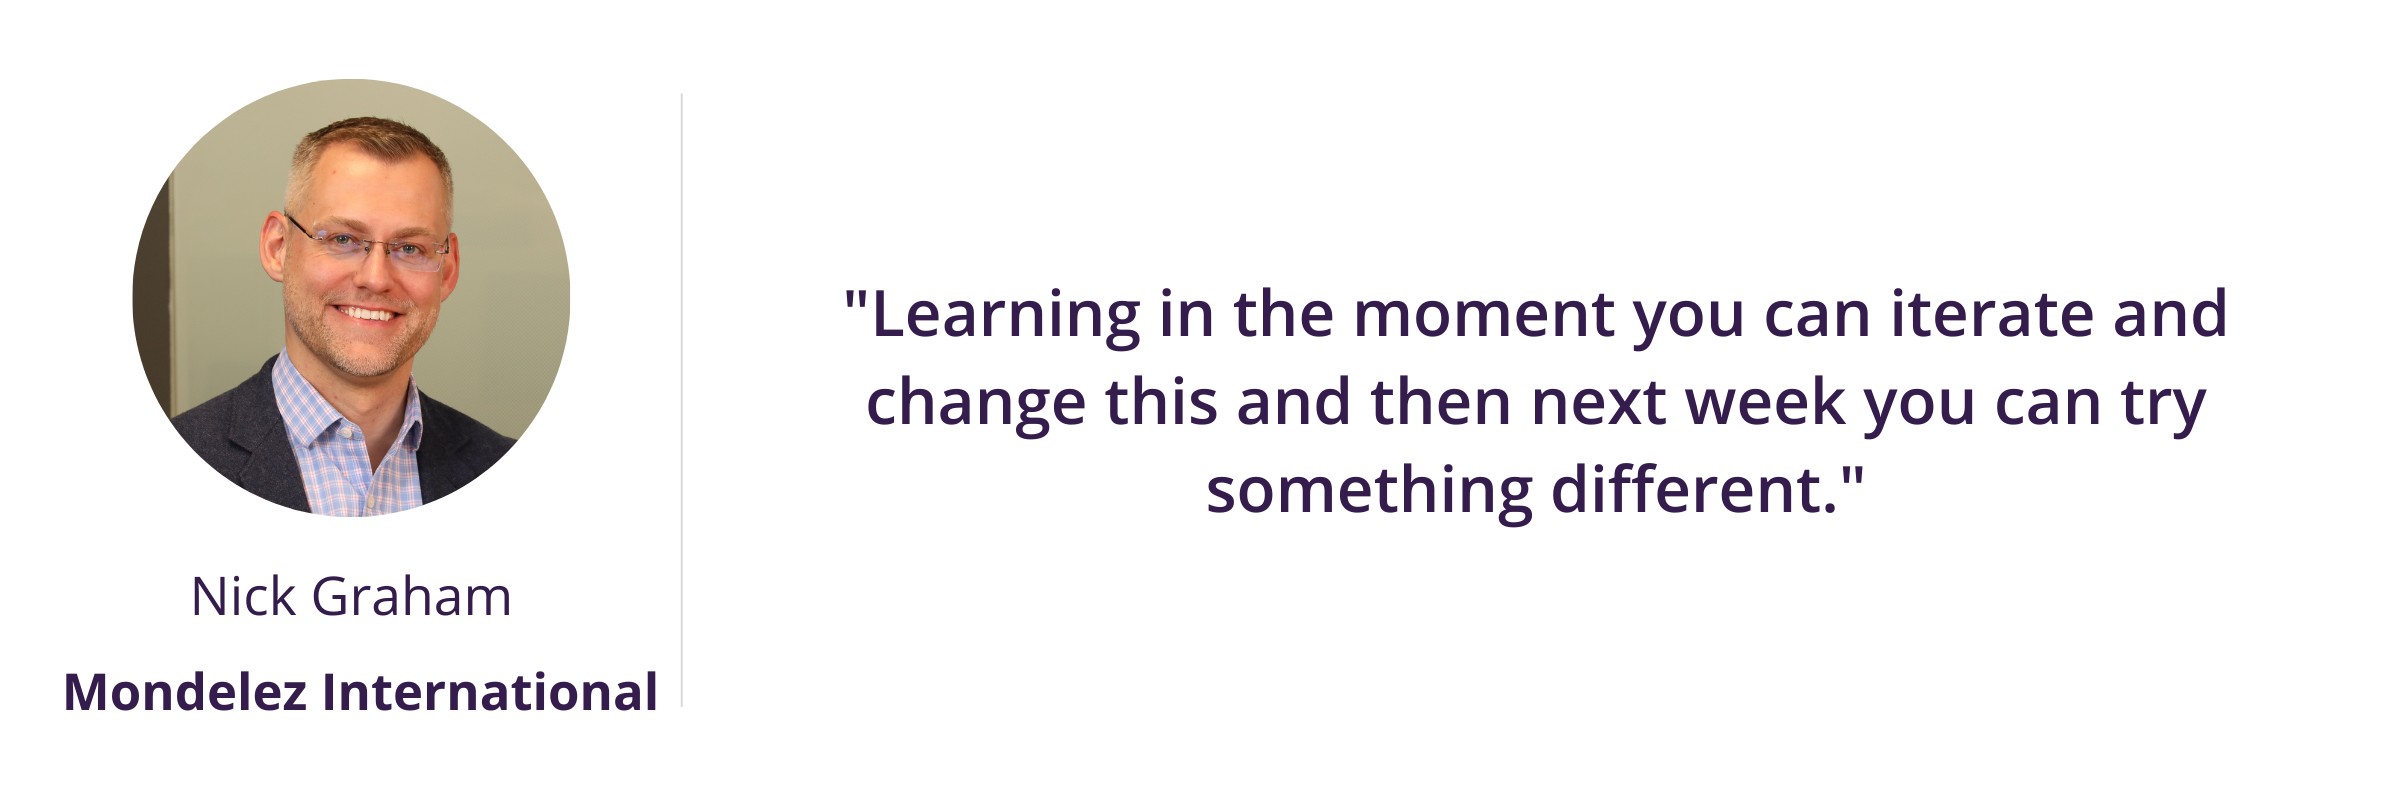 "Learning in the moment you can iterate and change this and then next week you can try something different."